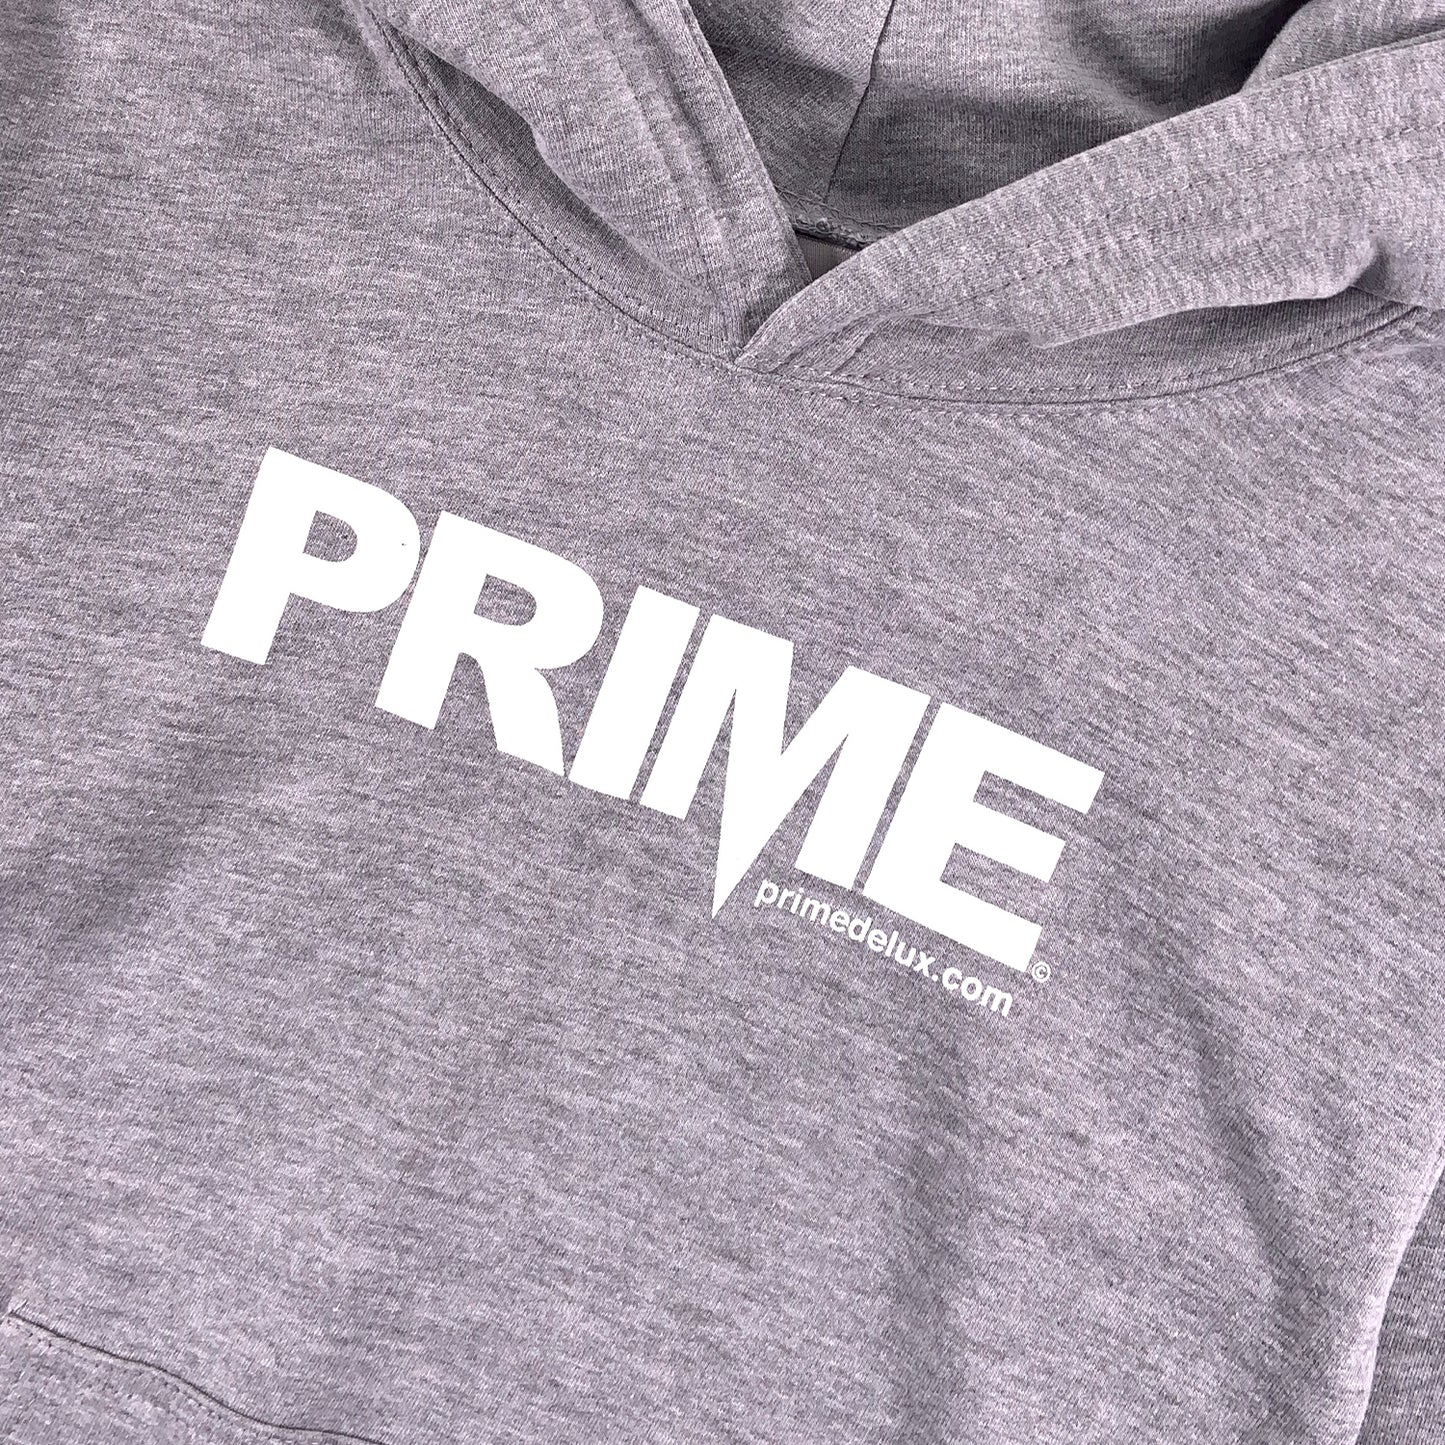 PRIME DELUX YOUTHS OG PREMIUM HOODED SWEAT - HEATHER GREY / WHITE - Prime Delux Store